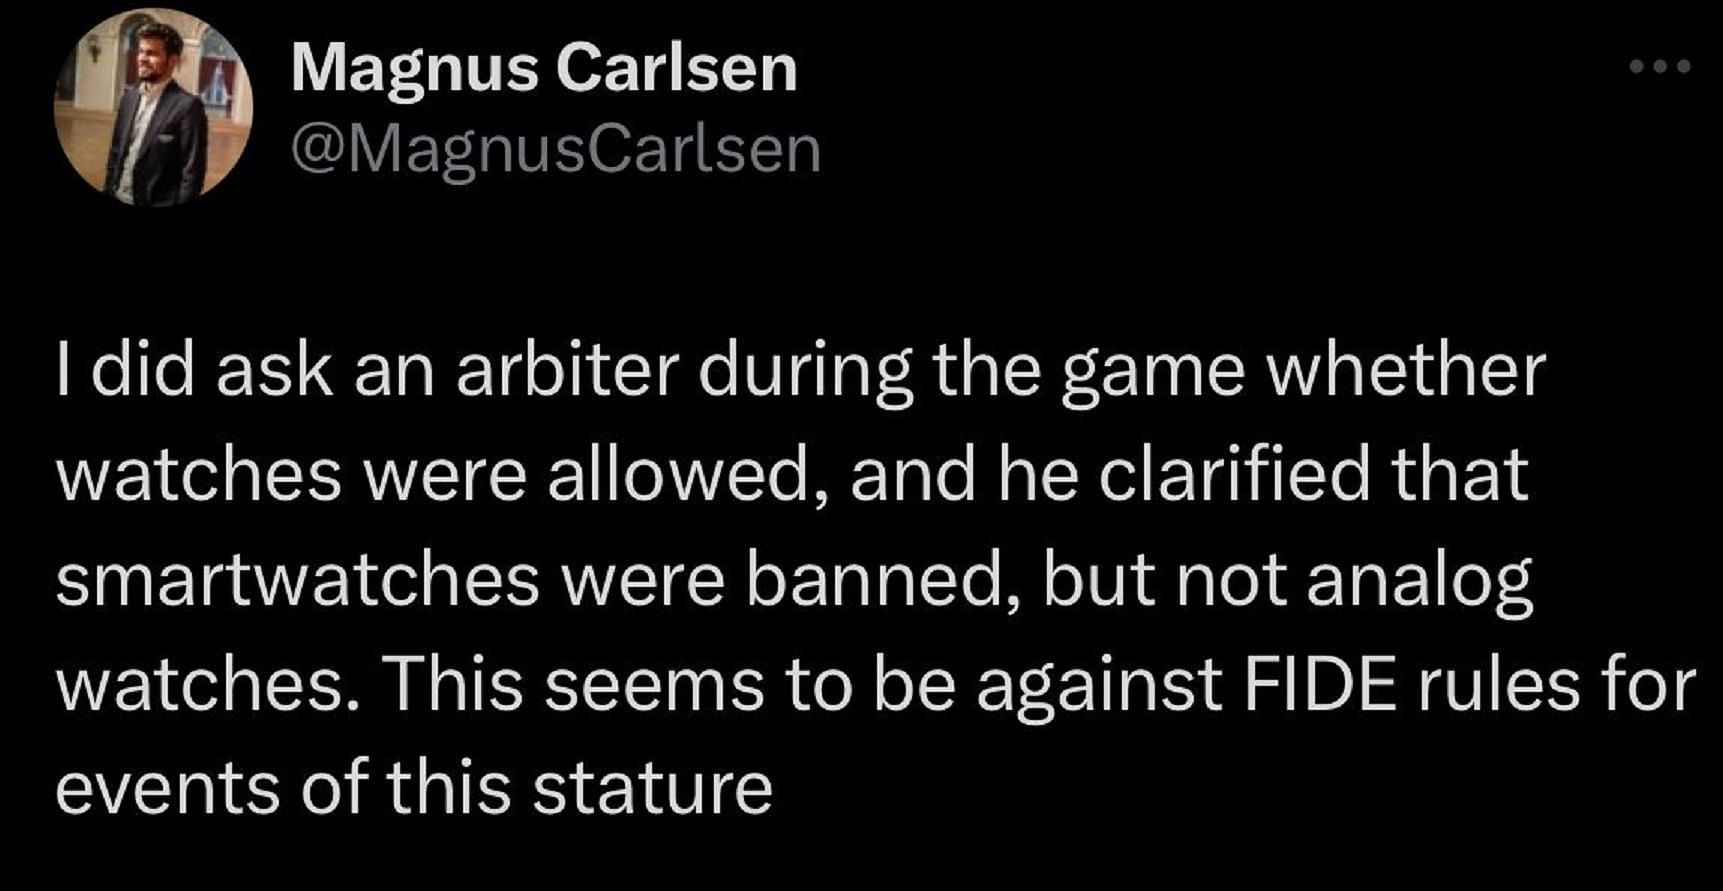 BREAKING NEWS 🚨 Magnus Carlsen was found guilty by the FIDE